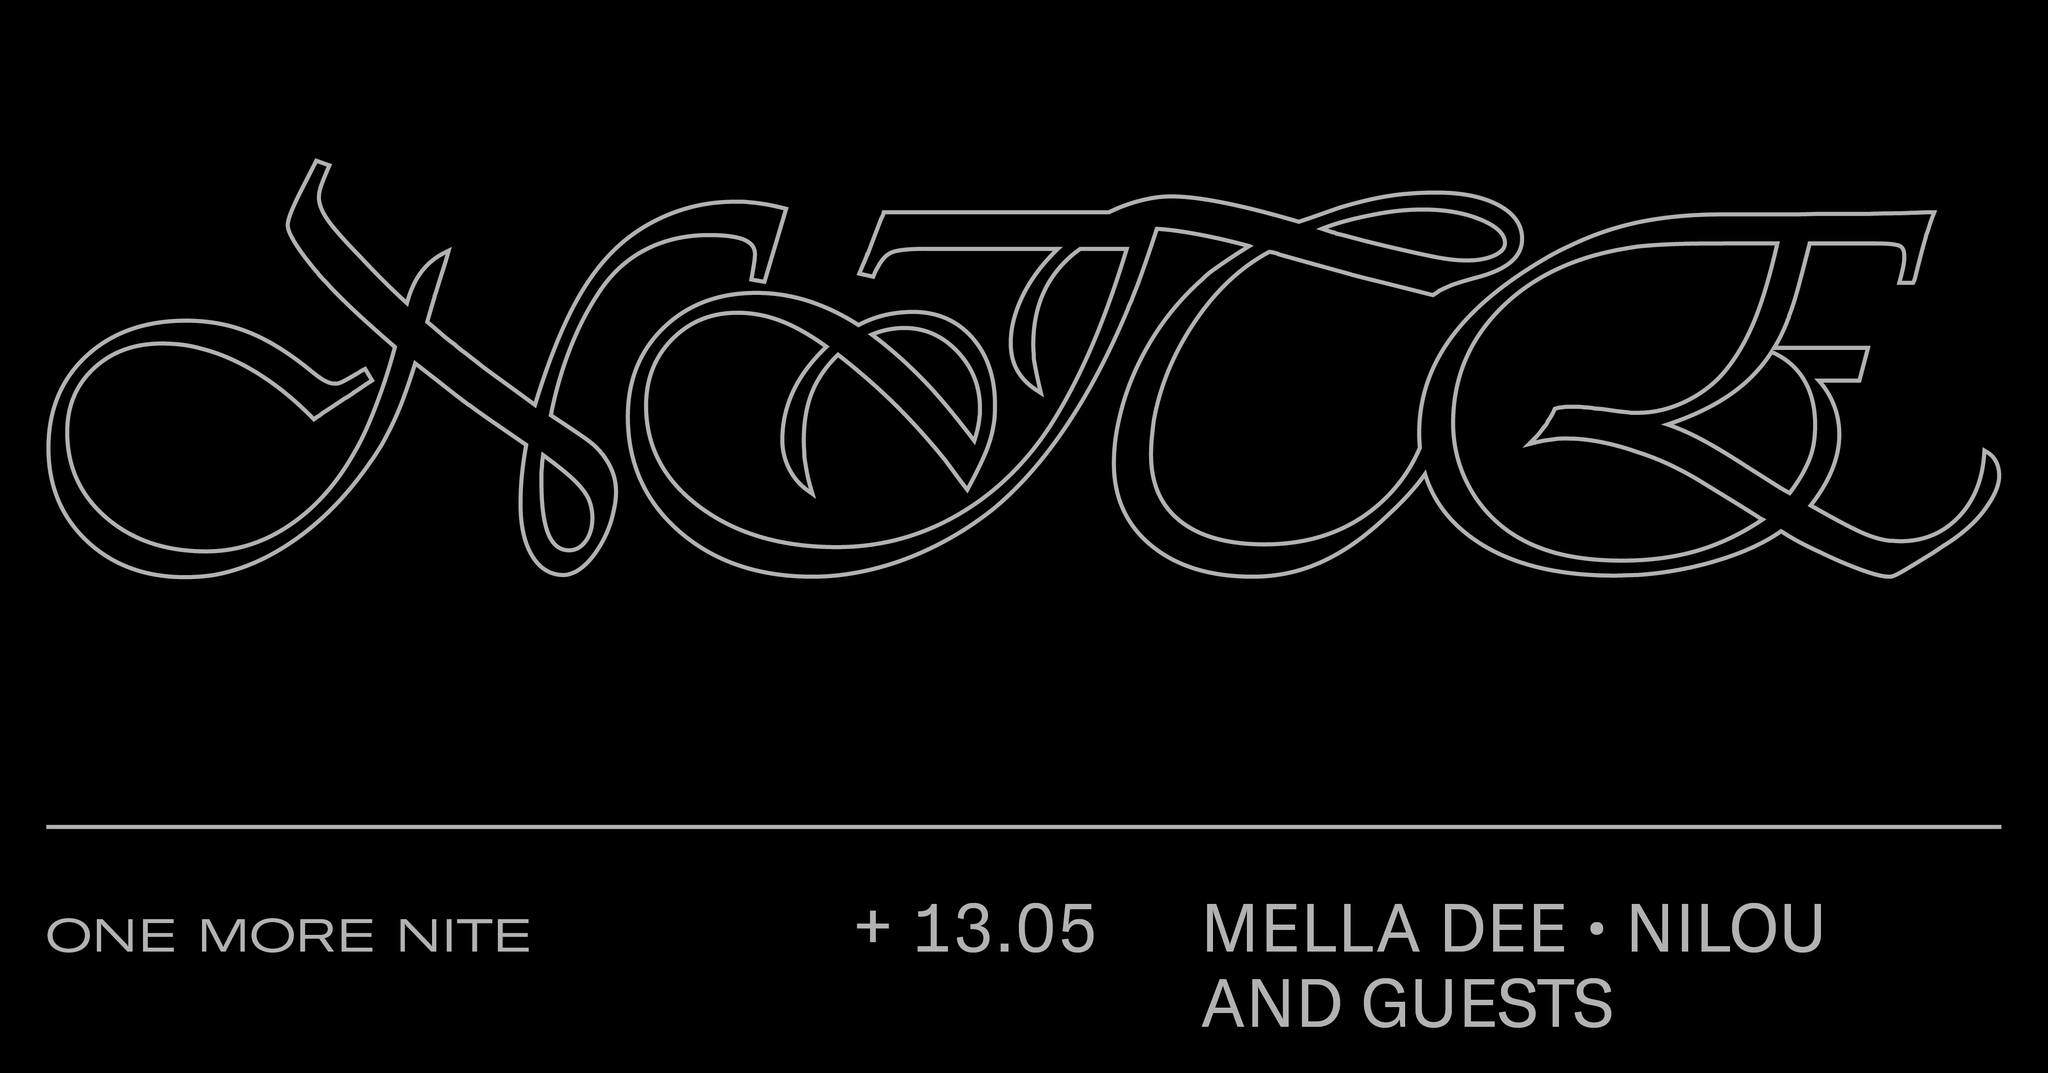 ONE MORE NITE with Mella Dee, Nilou and guests - Página frontal